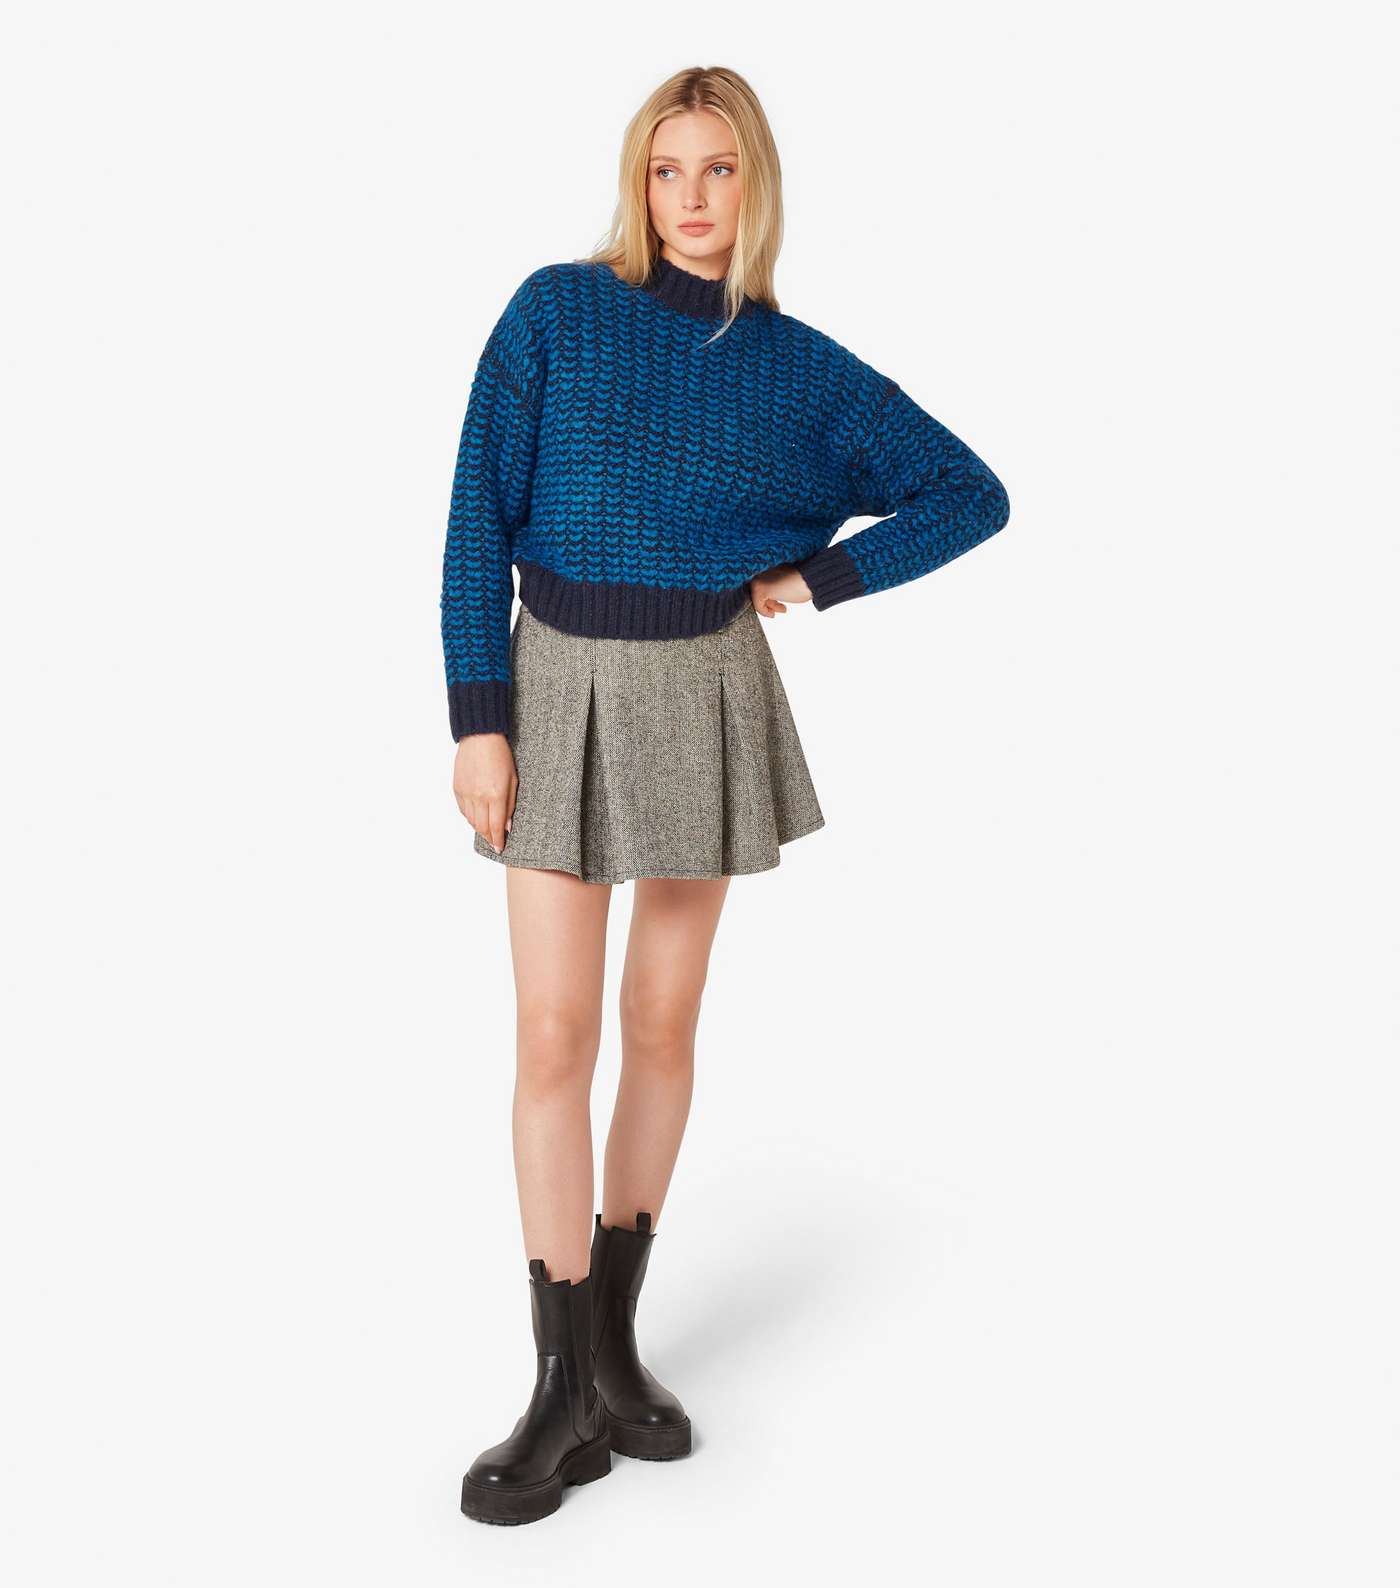 Apricot Navy Chevron Print Knitted Jumper Image 2